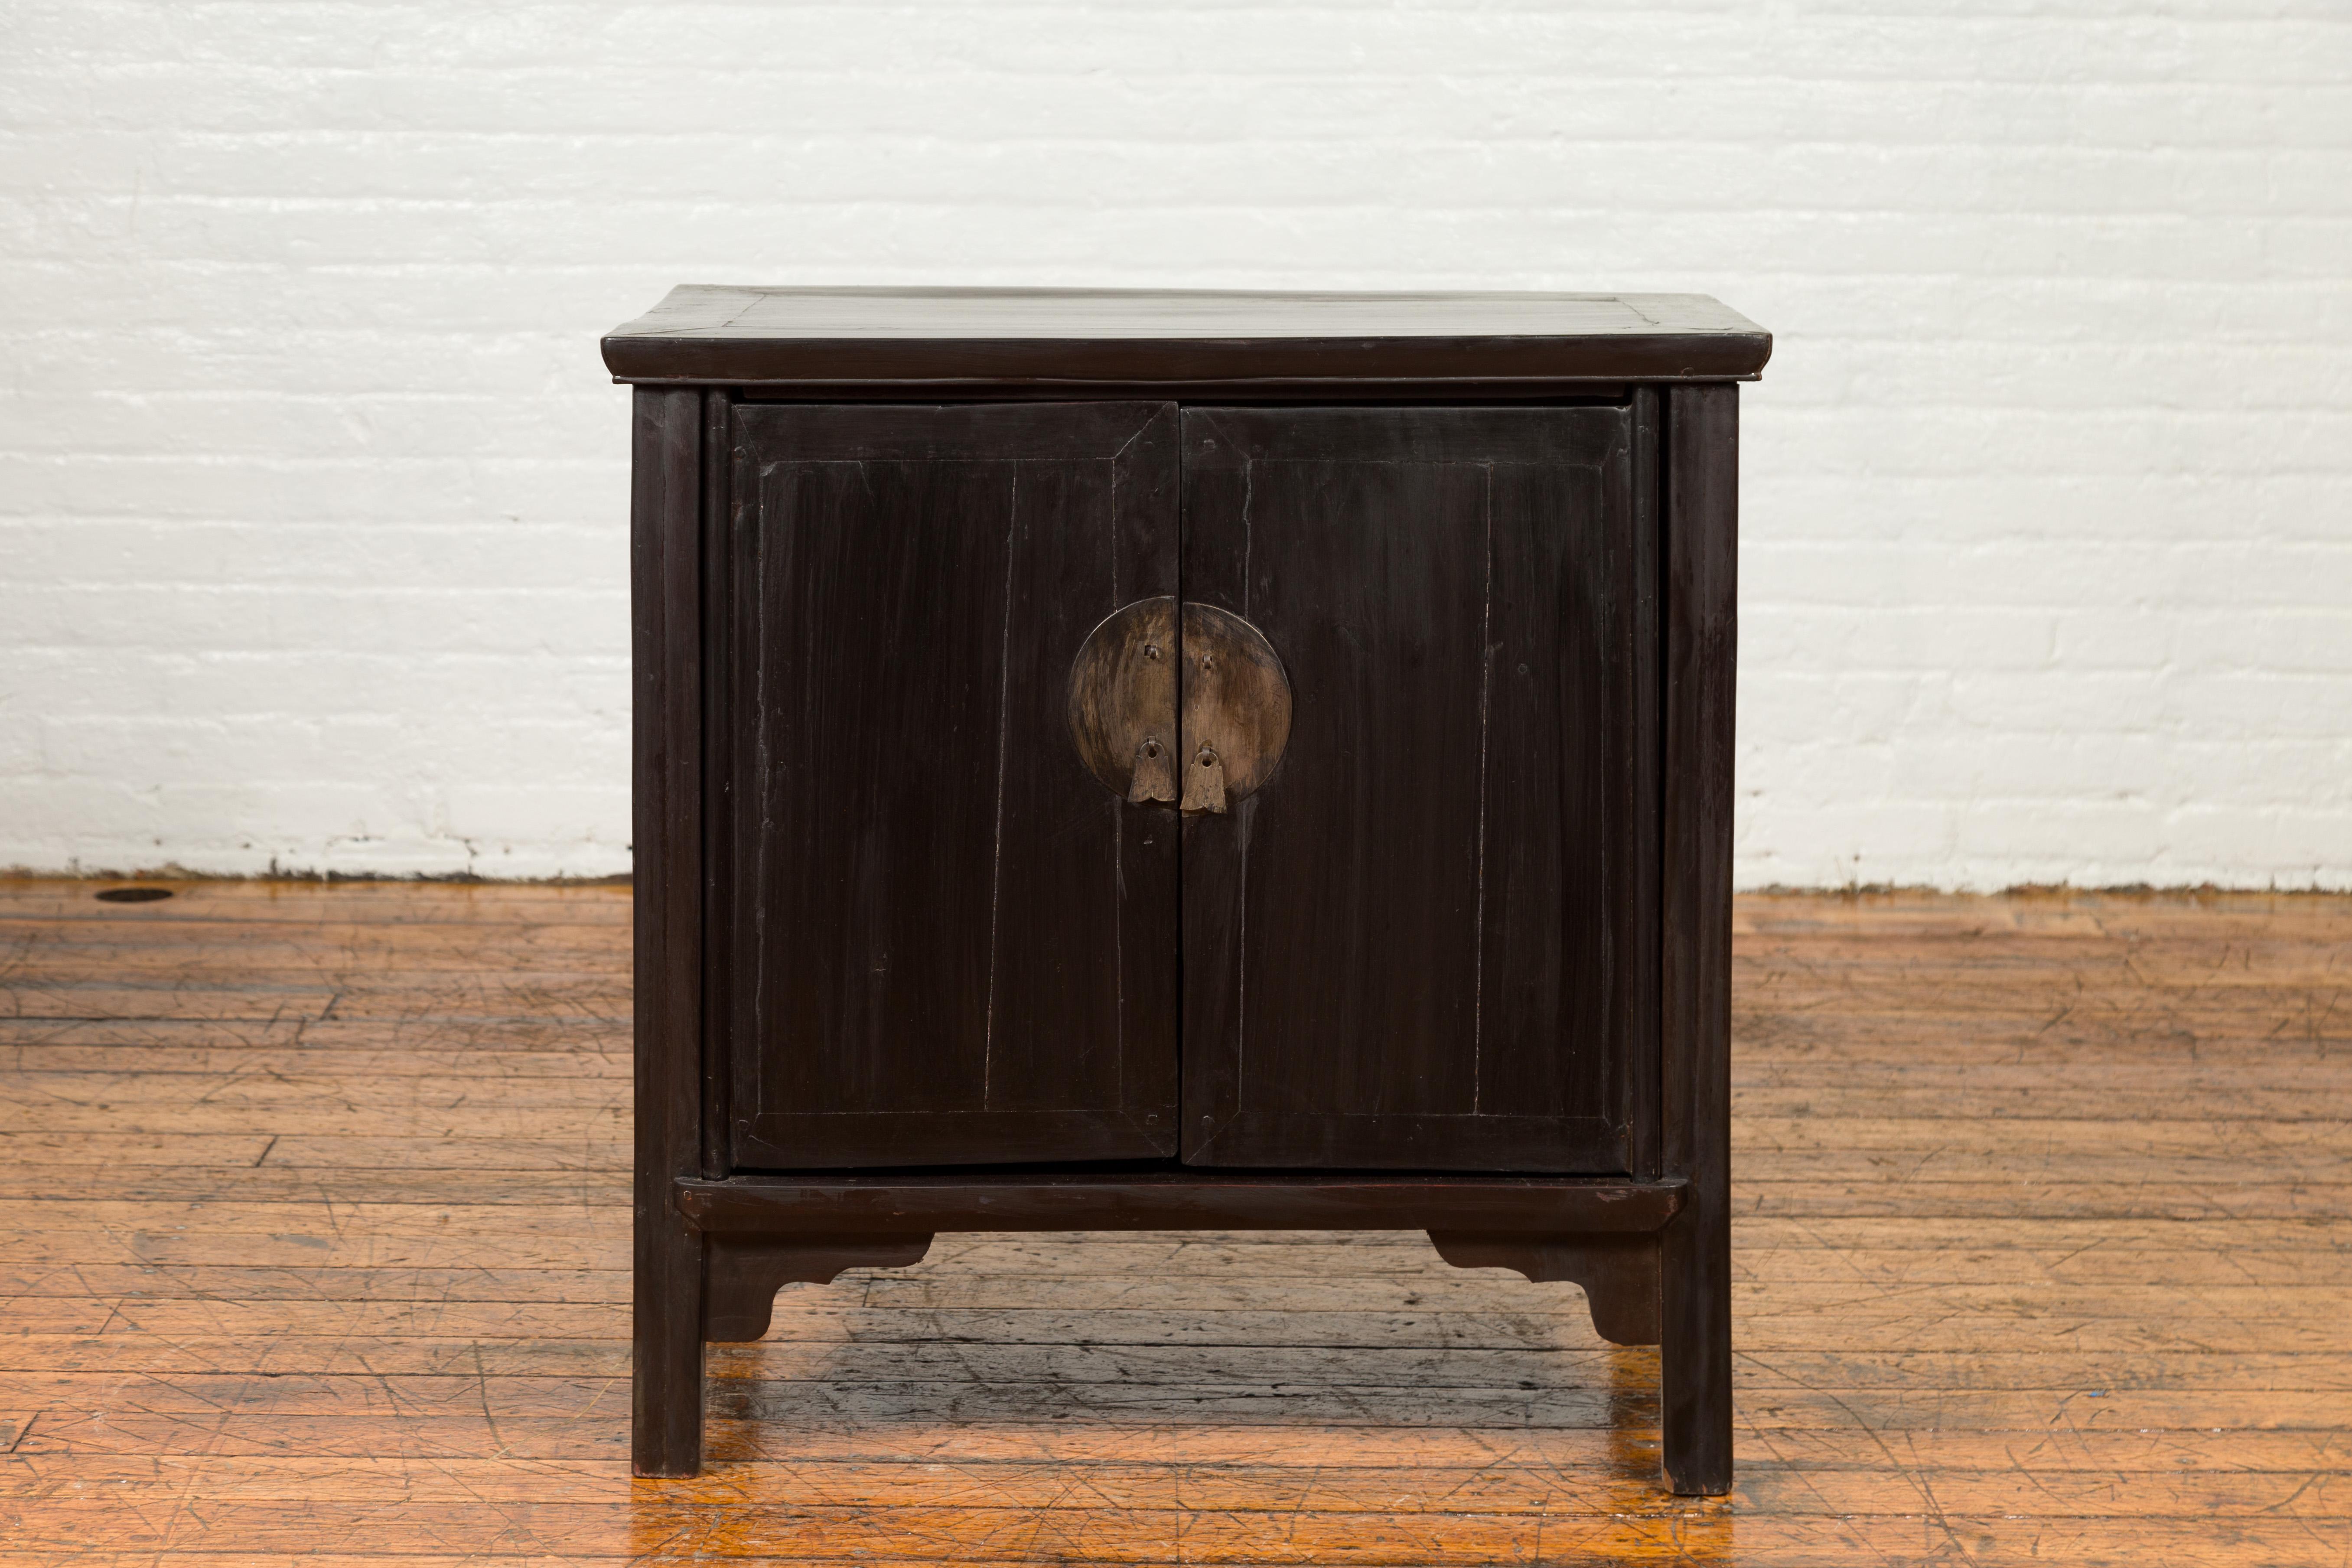 A Chinese vintage Ming Dynasty style side cabinet from the mid-20th century, with round medallion hardware and dark brown patina. Created in China during the midcentury period, this side cabinet features a rectangular top with central board and